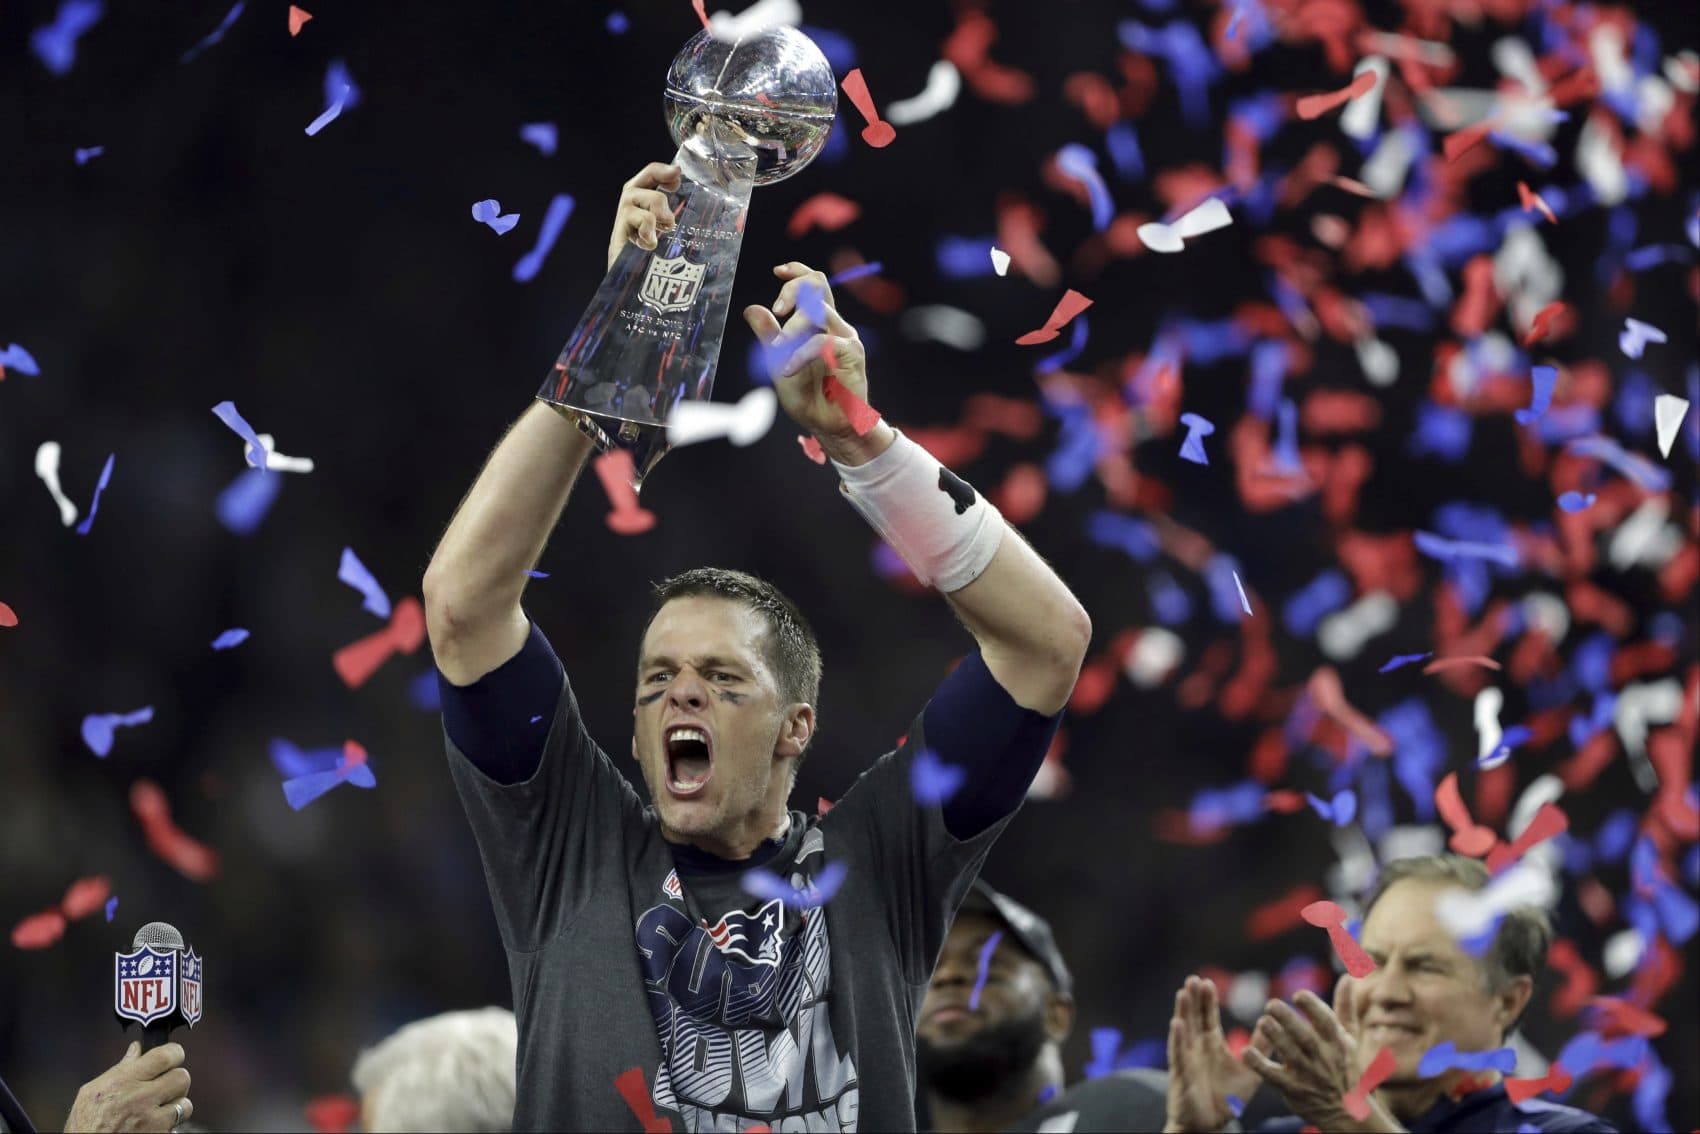 Tom Brady and the Patriots beat the Atlanta Falcons in the Super Bowl two seasons ago. They will return to the Super Bowl, in Atlanta, to face the Los Angeles Rams on Feb. 3. (Darron Cummings/AP)